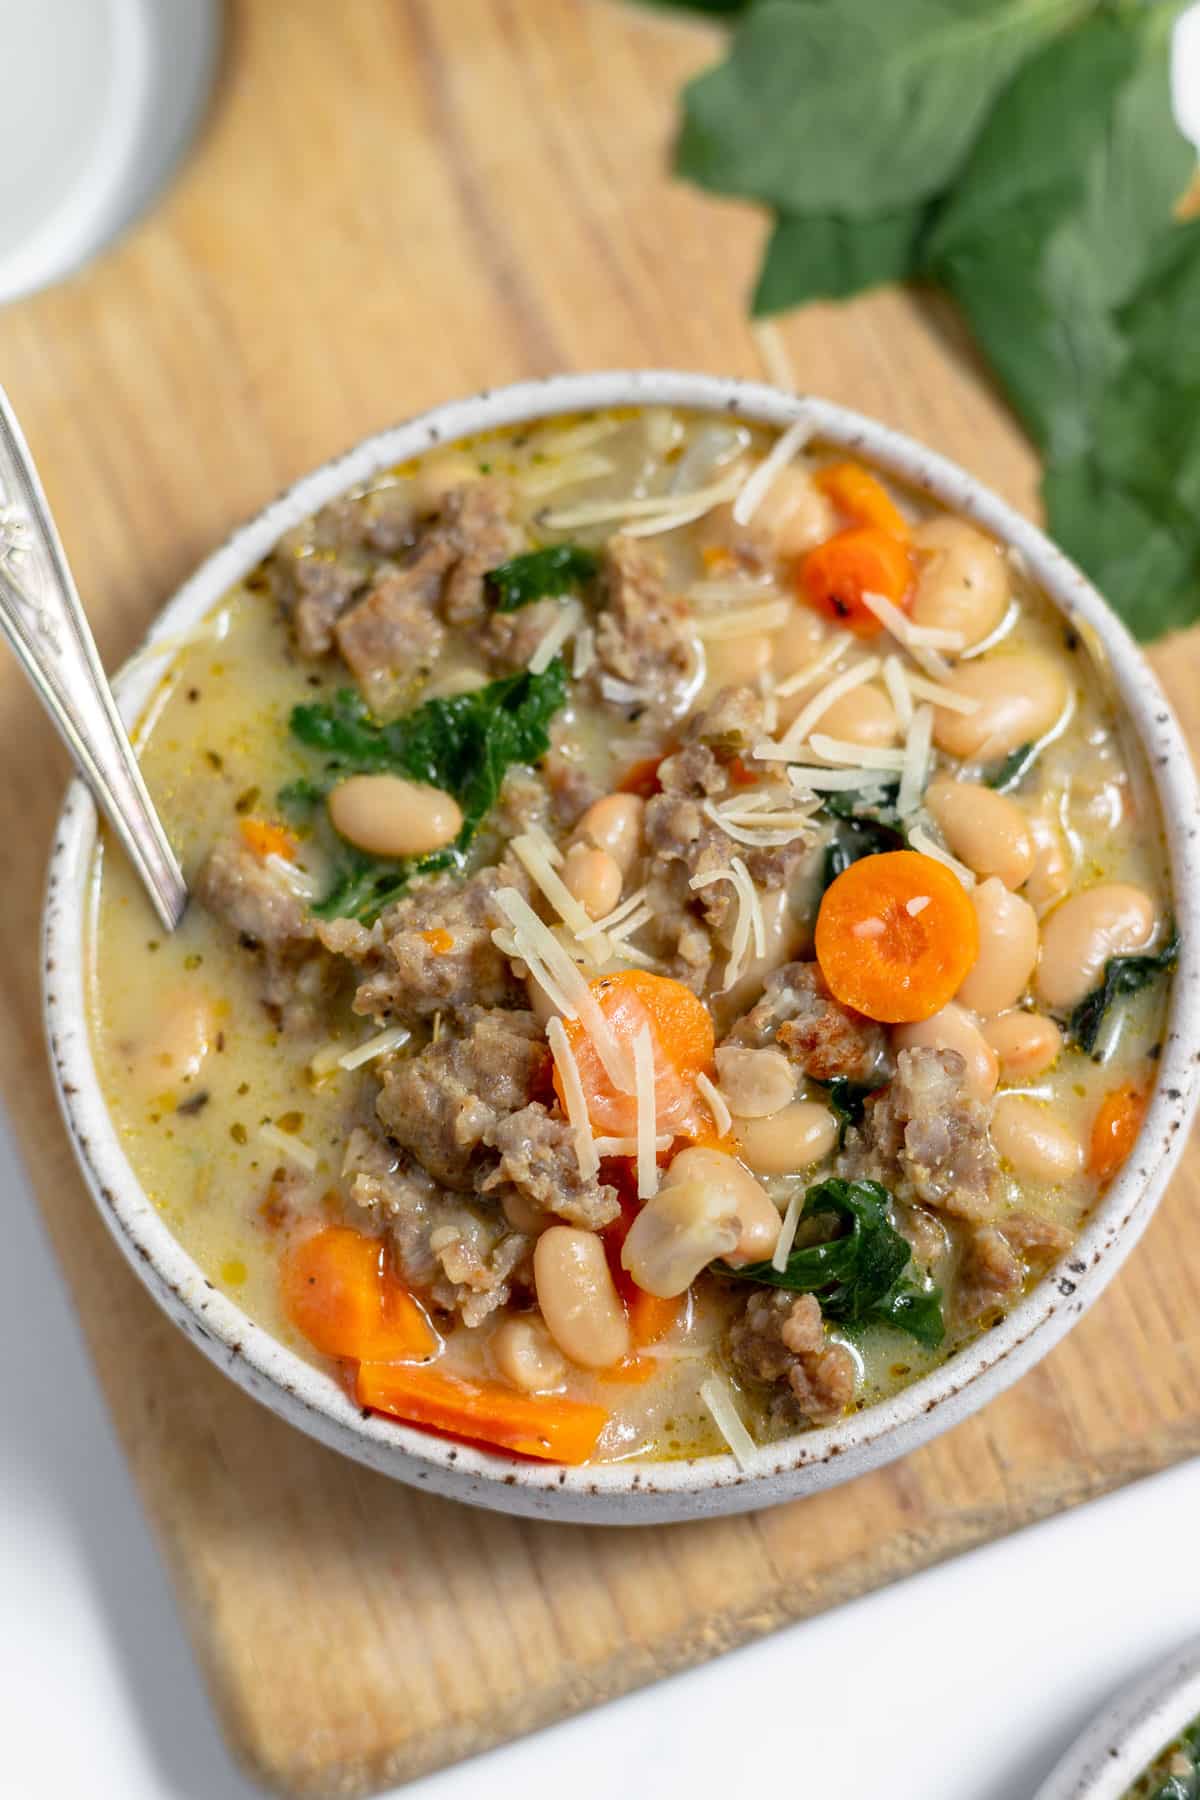 A bowl of soup with meat and vegetables.